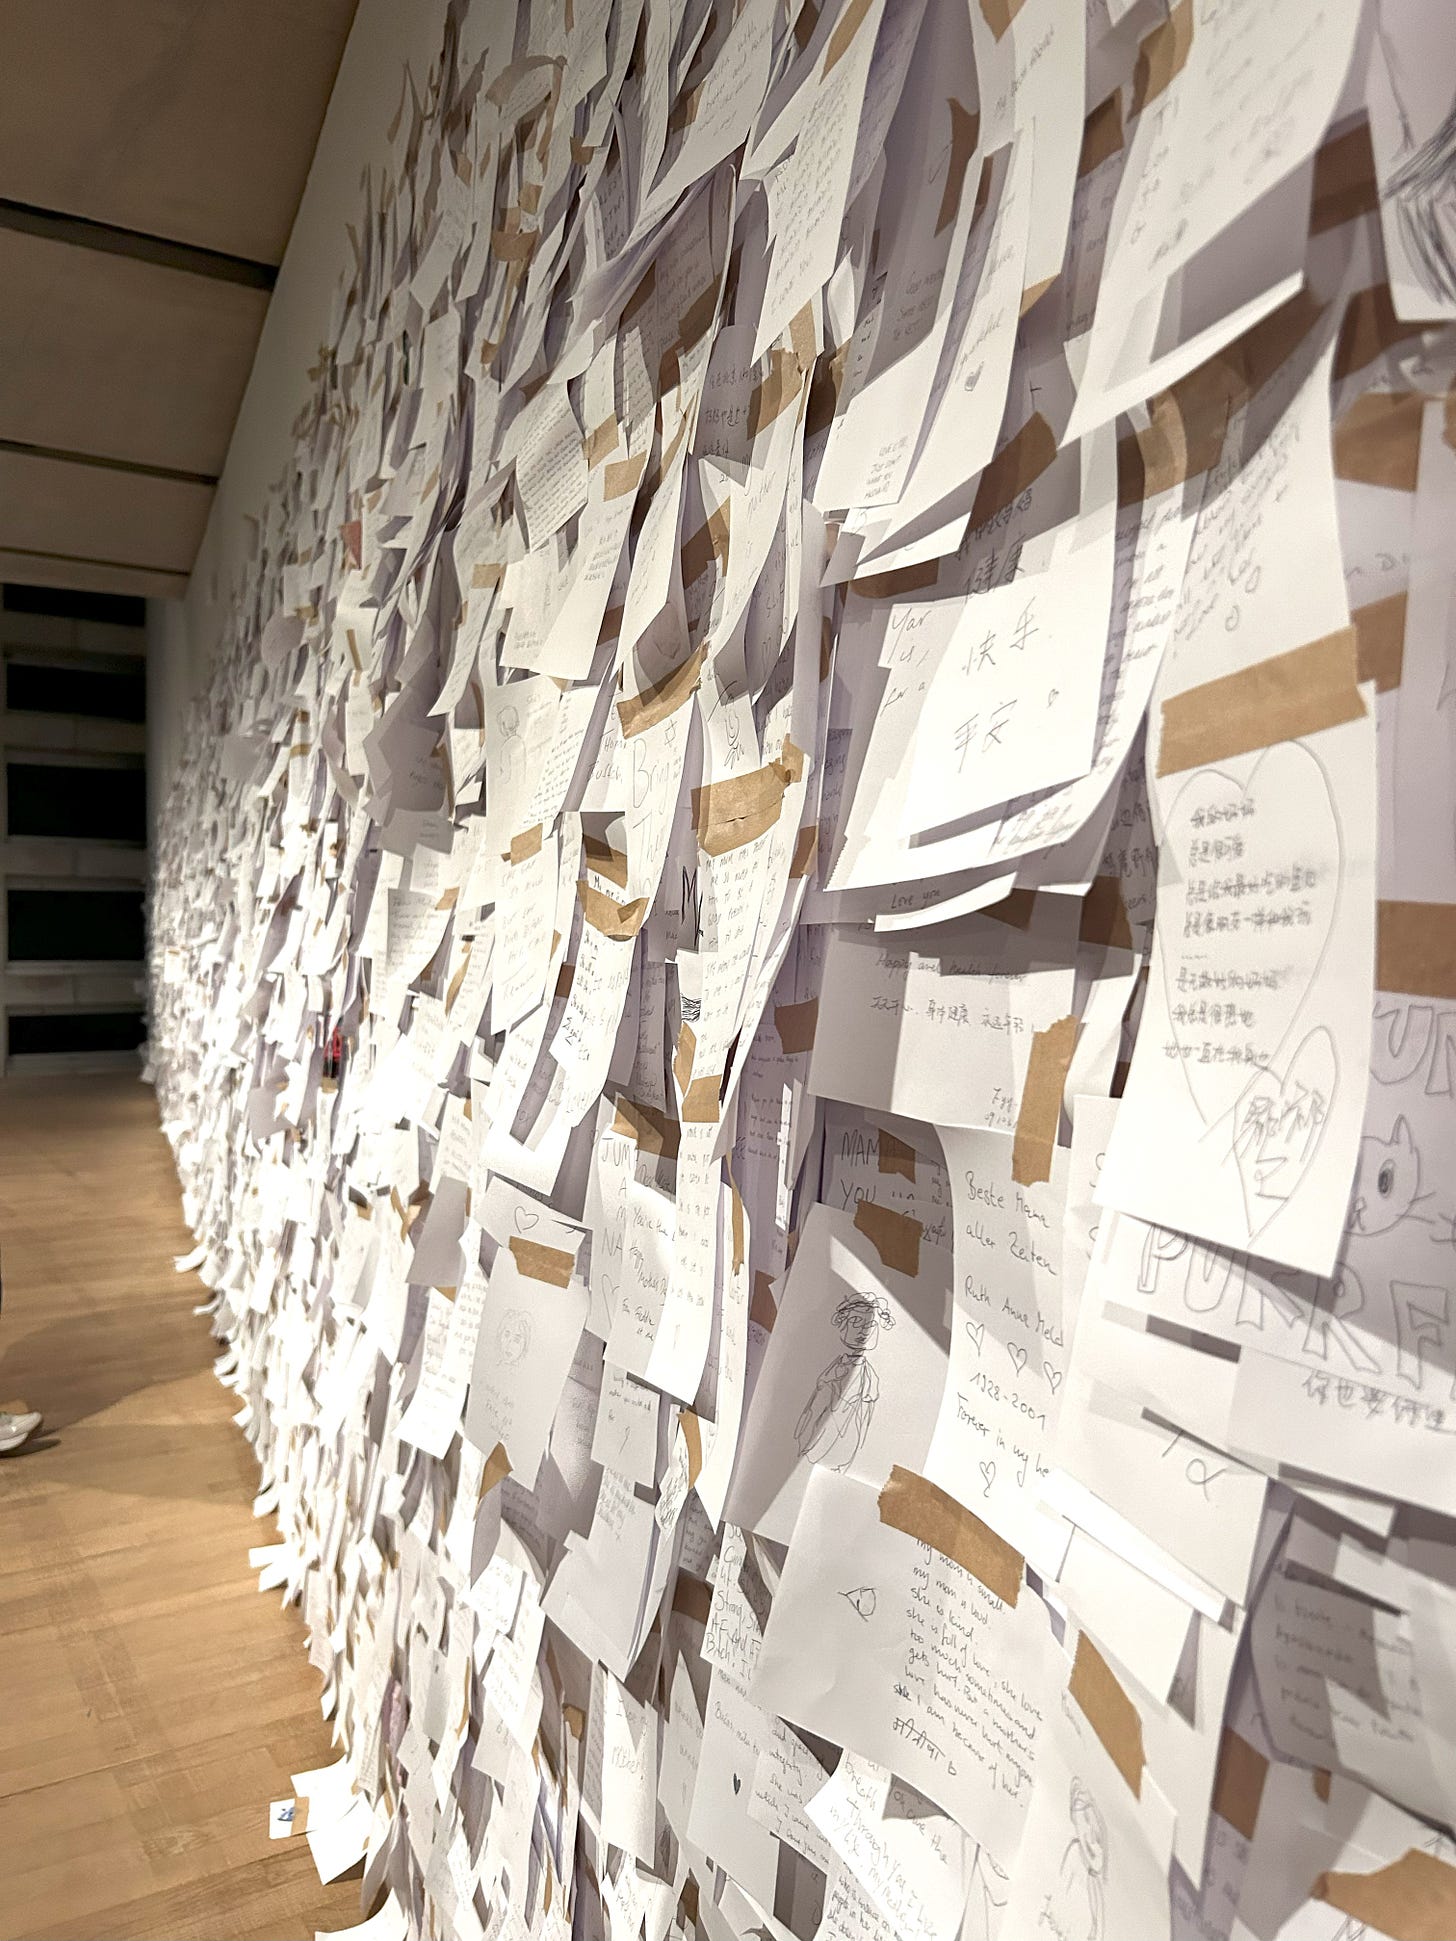 a wall of white papers with writing stuck on with brown tape